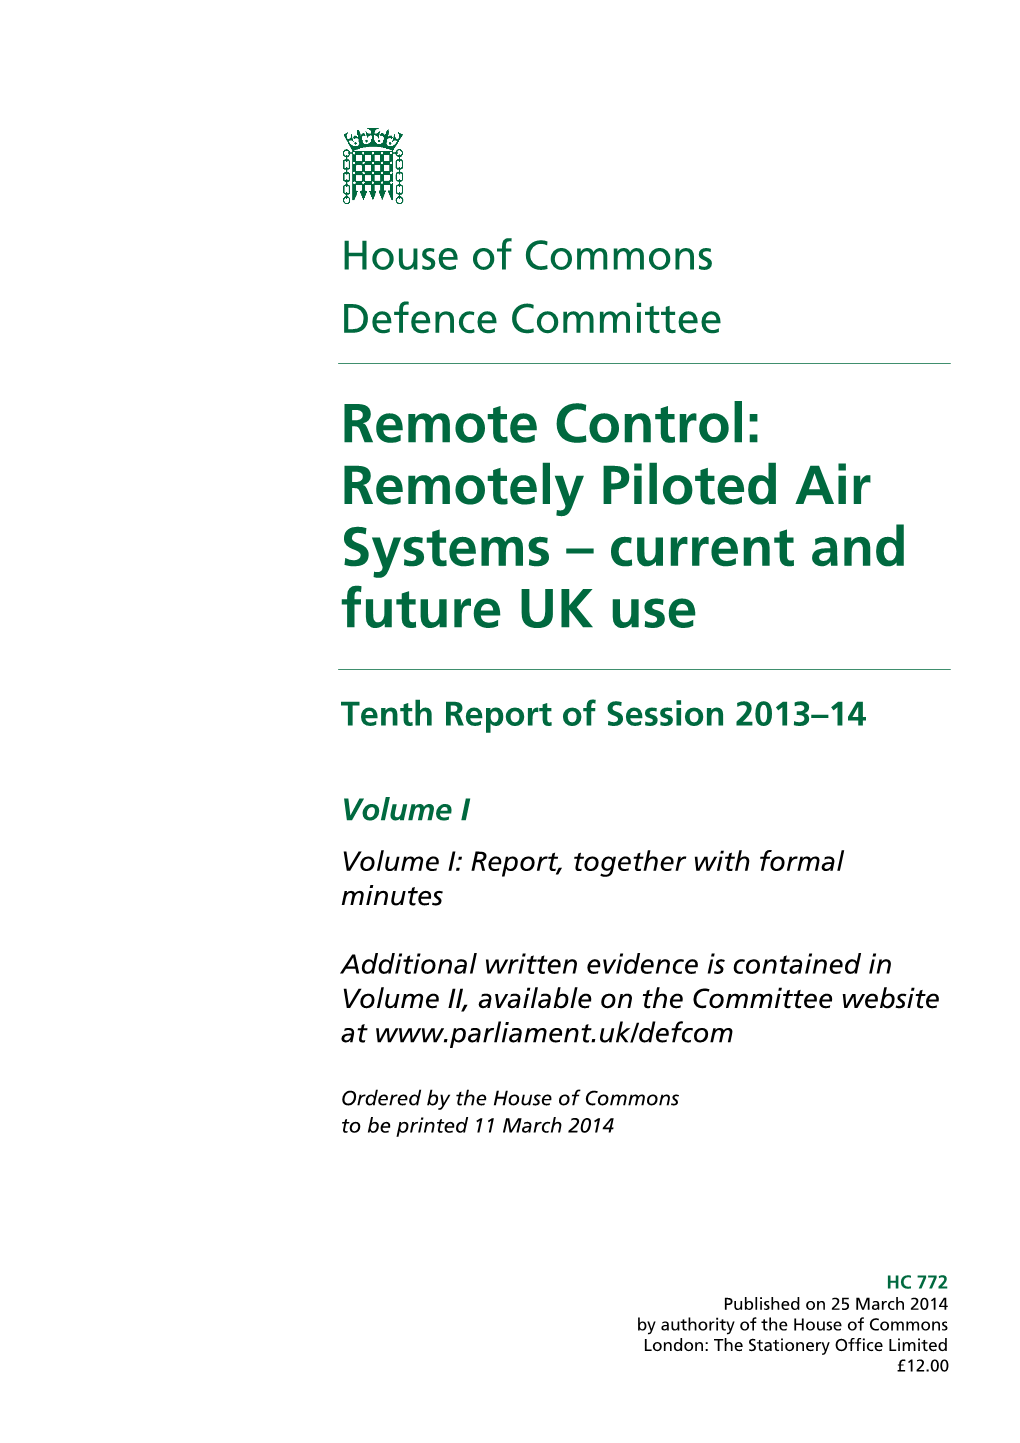 Remotely Piloted Air Systems – Current and Future UK Use